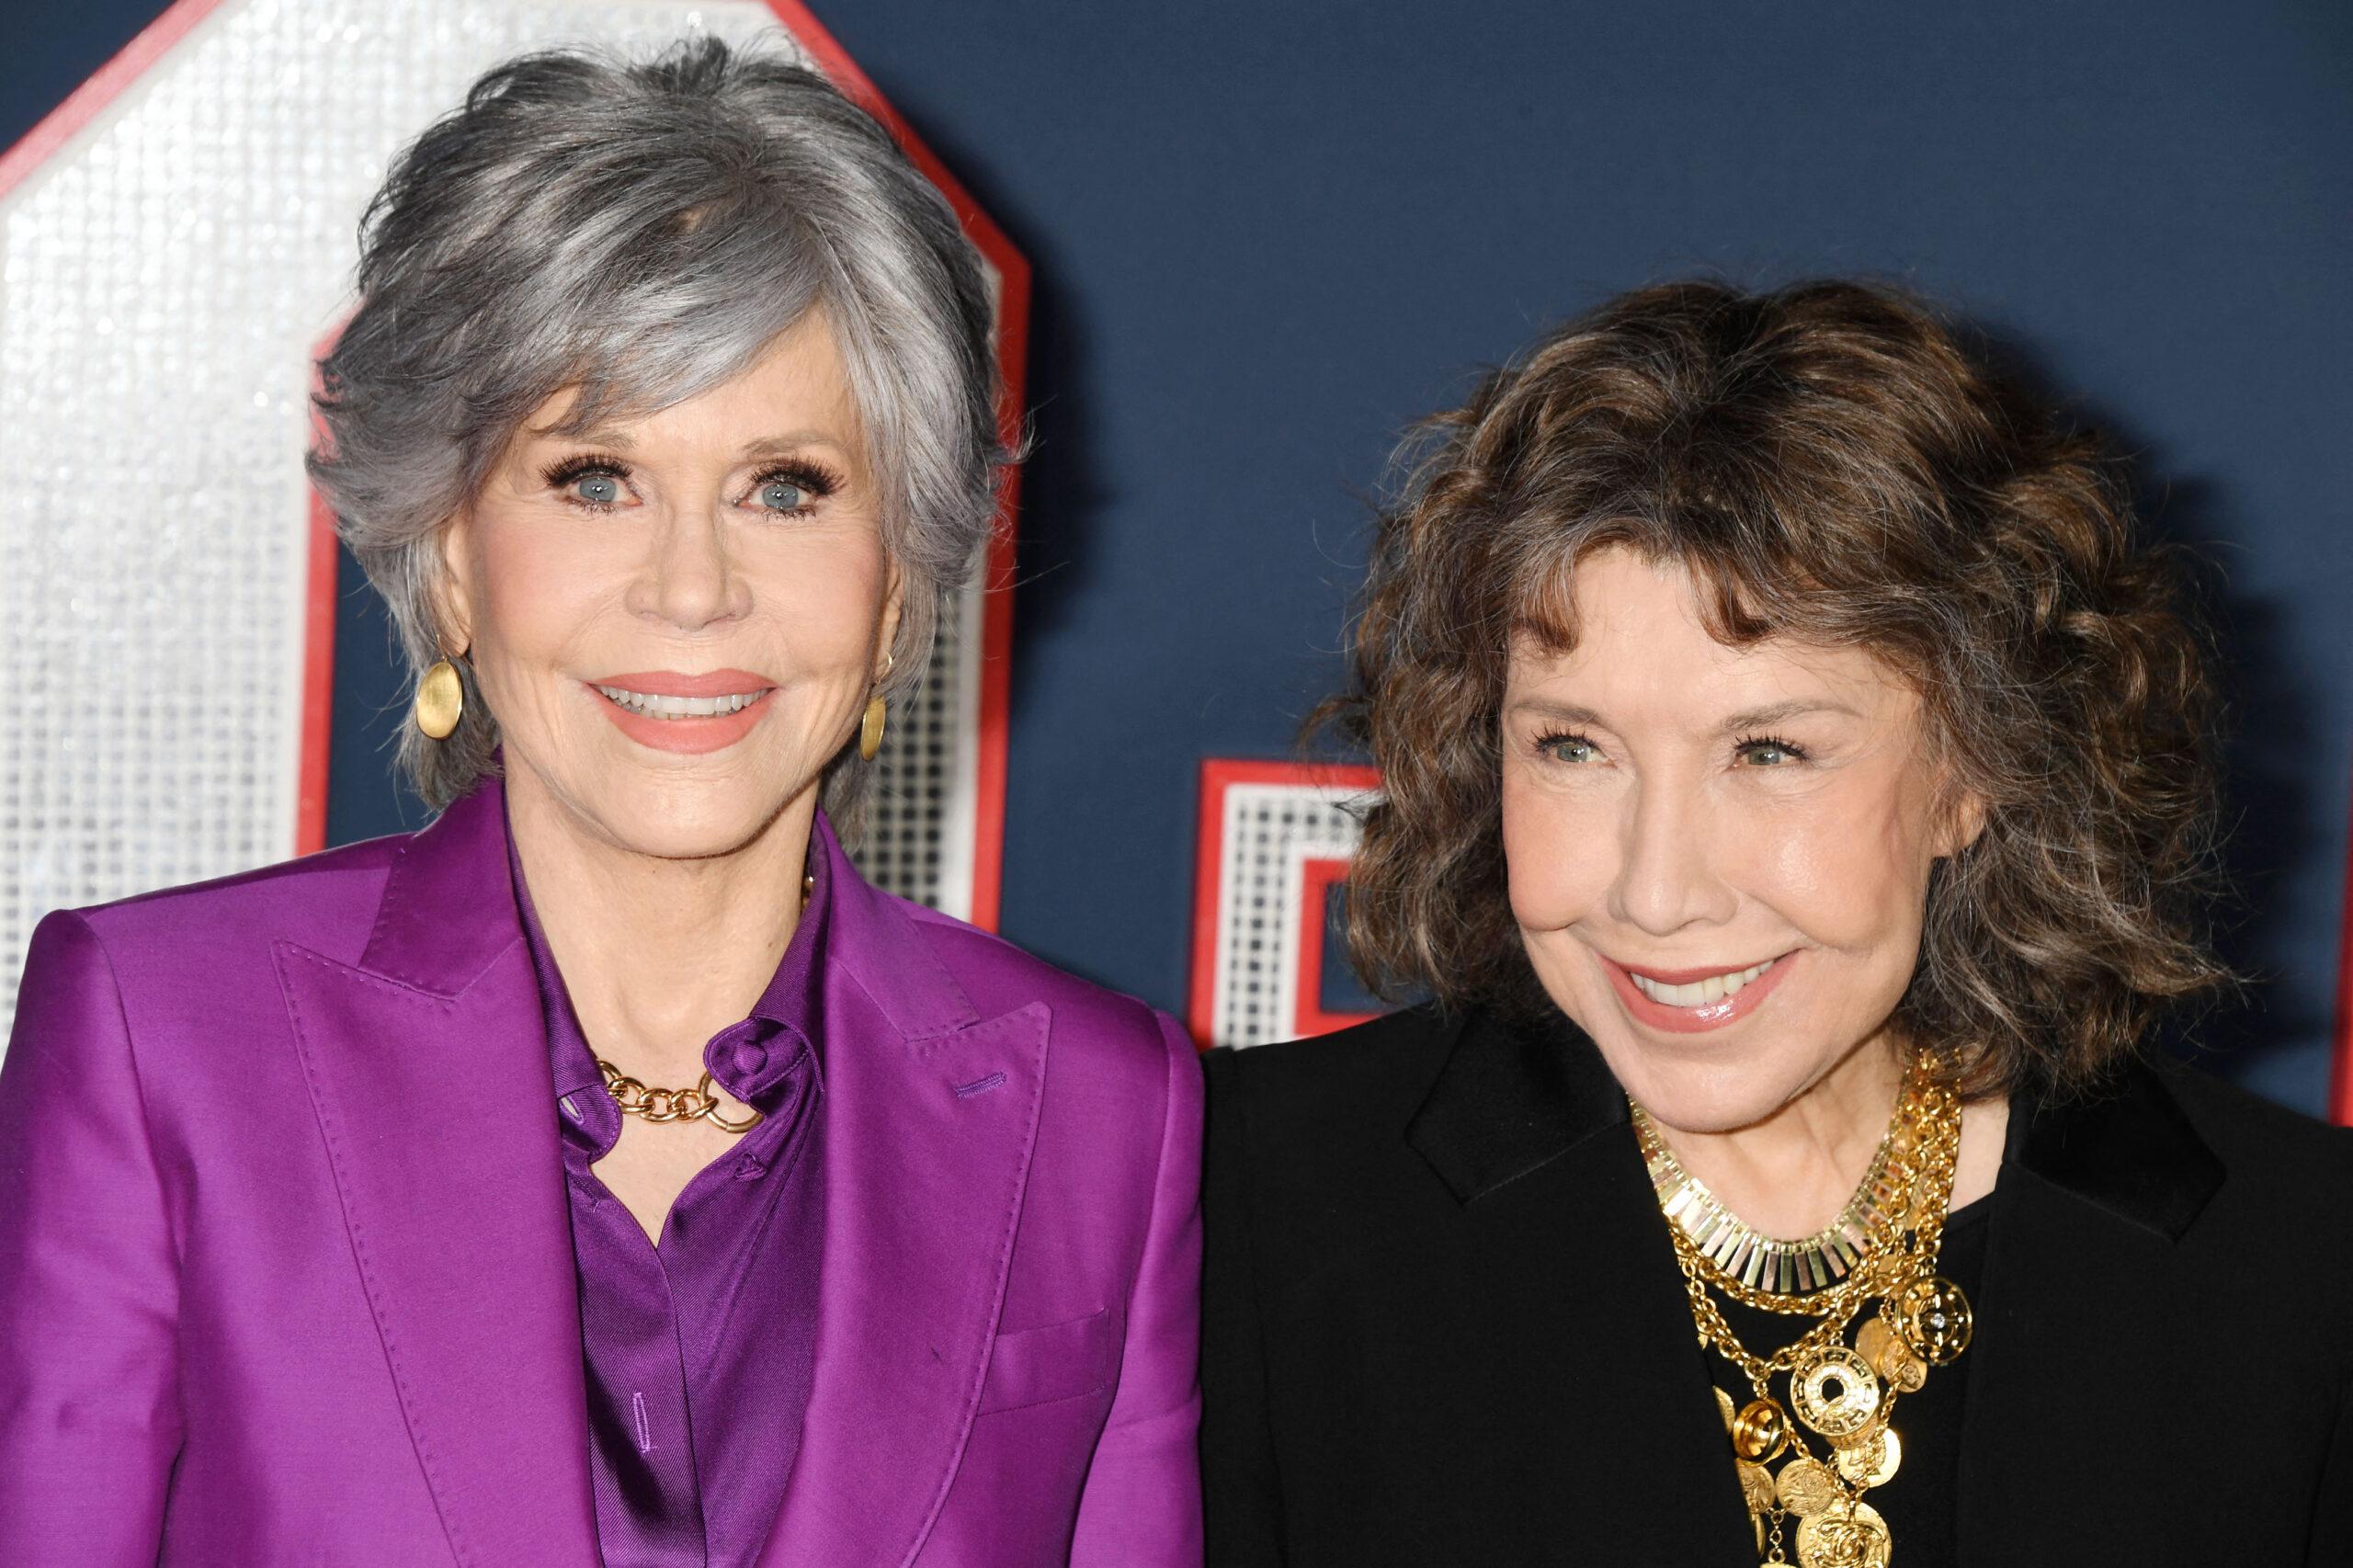 Jane Fonda and Lily Tomlin at the Los Angeles Premiere Screening Of Paramount Pictures' "80 For Brady" - Arrivals